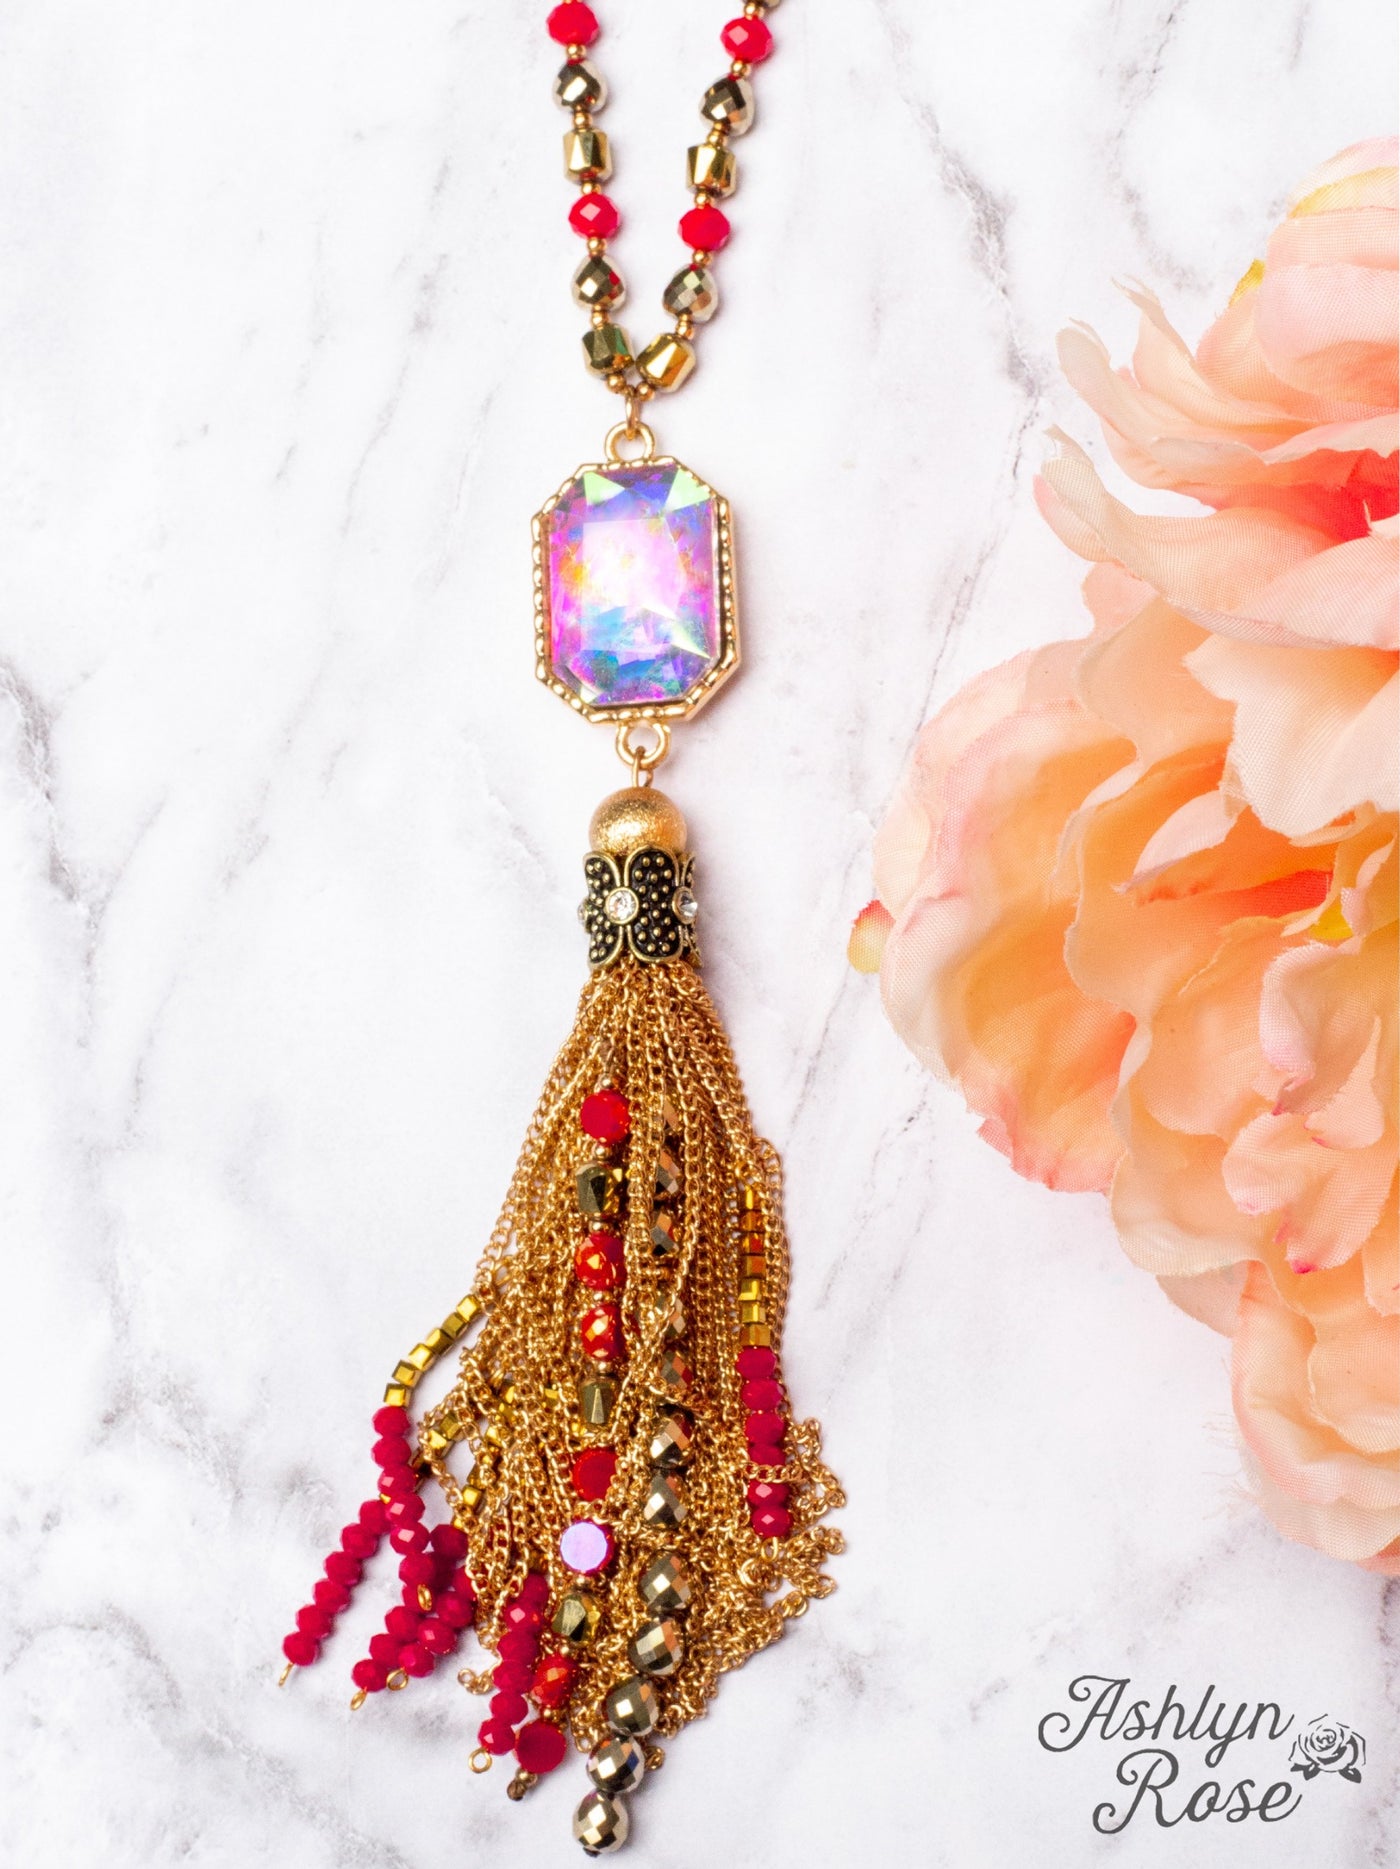 WATCH THE SUNSET WITH ME IRIDESCENT PENDANT WITH GOLD CHAIN TASSELS ON A MIXED CRYSTAL BEADED NECKLACE, RED